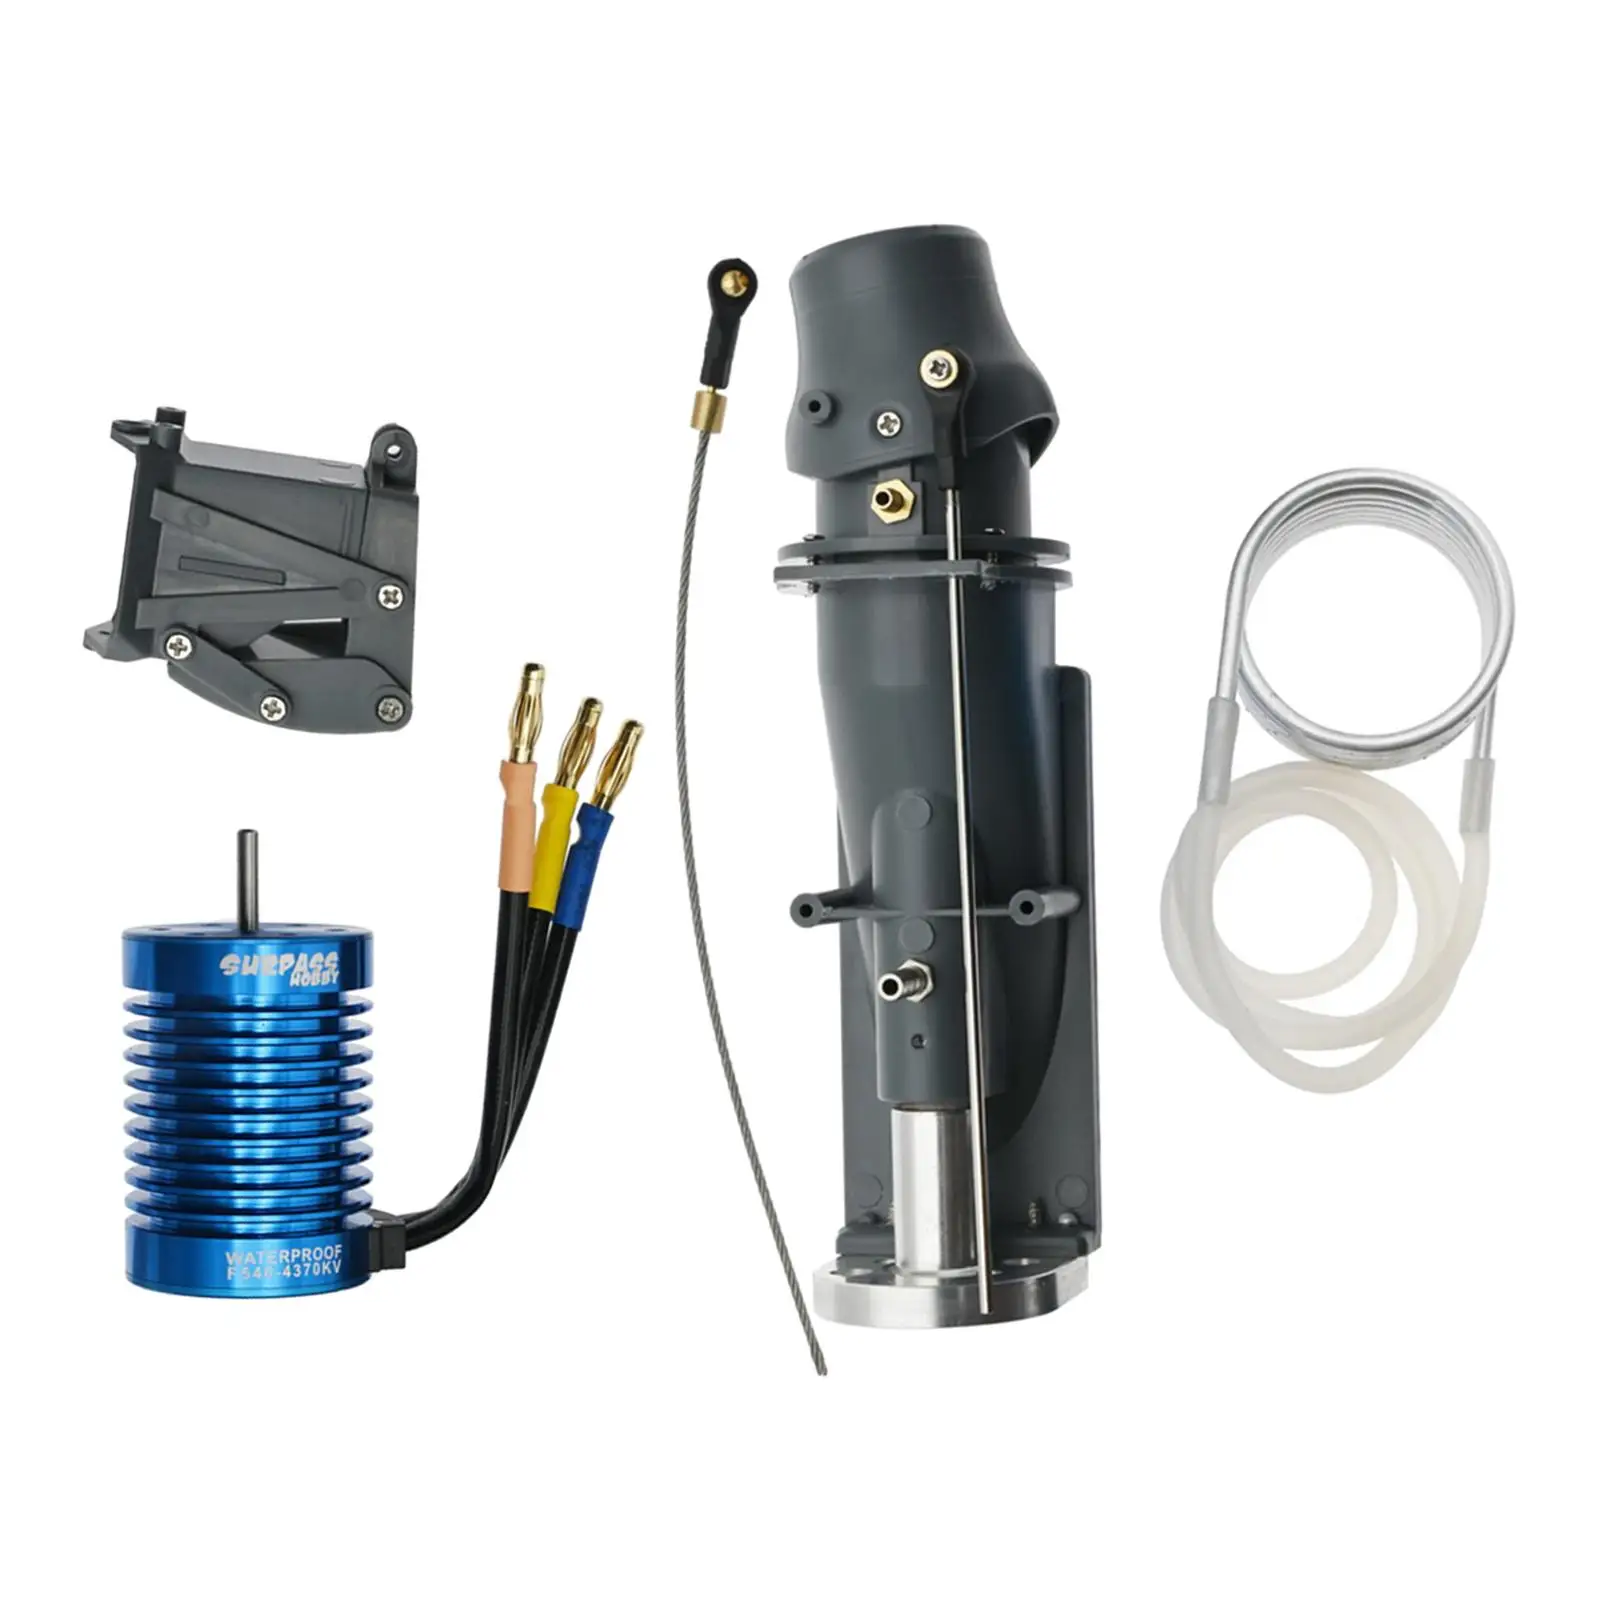 Water Thruster Jet Pump with 540 Brushless Motor 820W 66A for RC Jet Drive Boat Replaces Spare Parts Accessory Upgrade